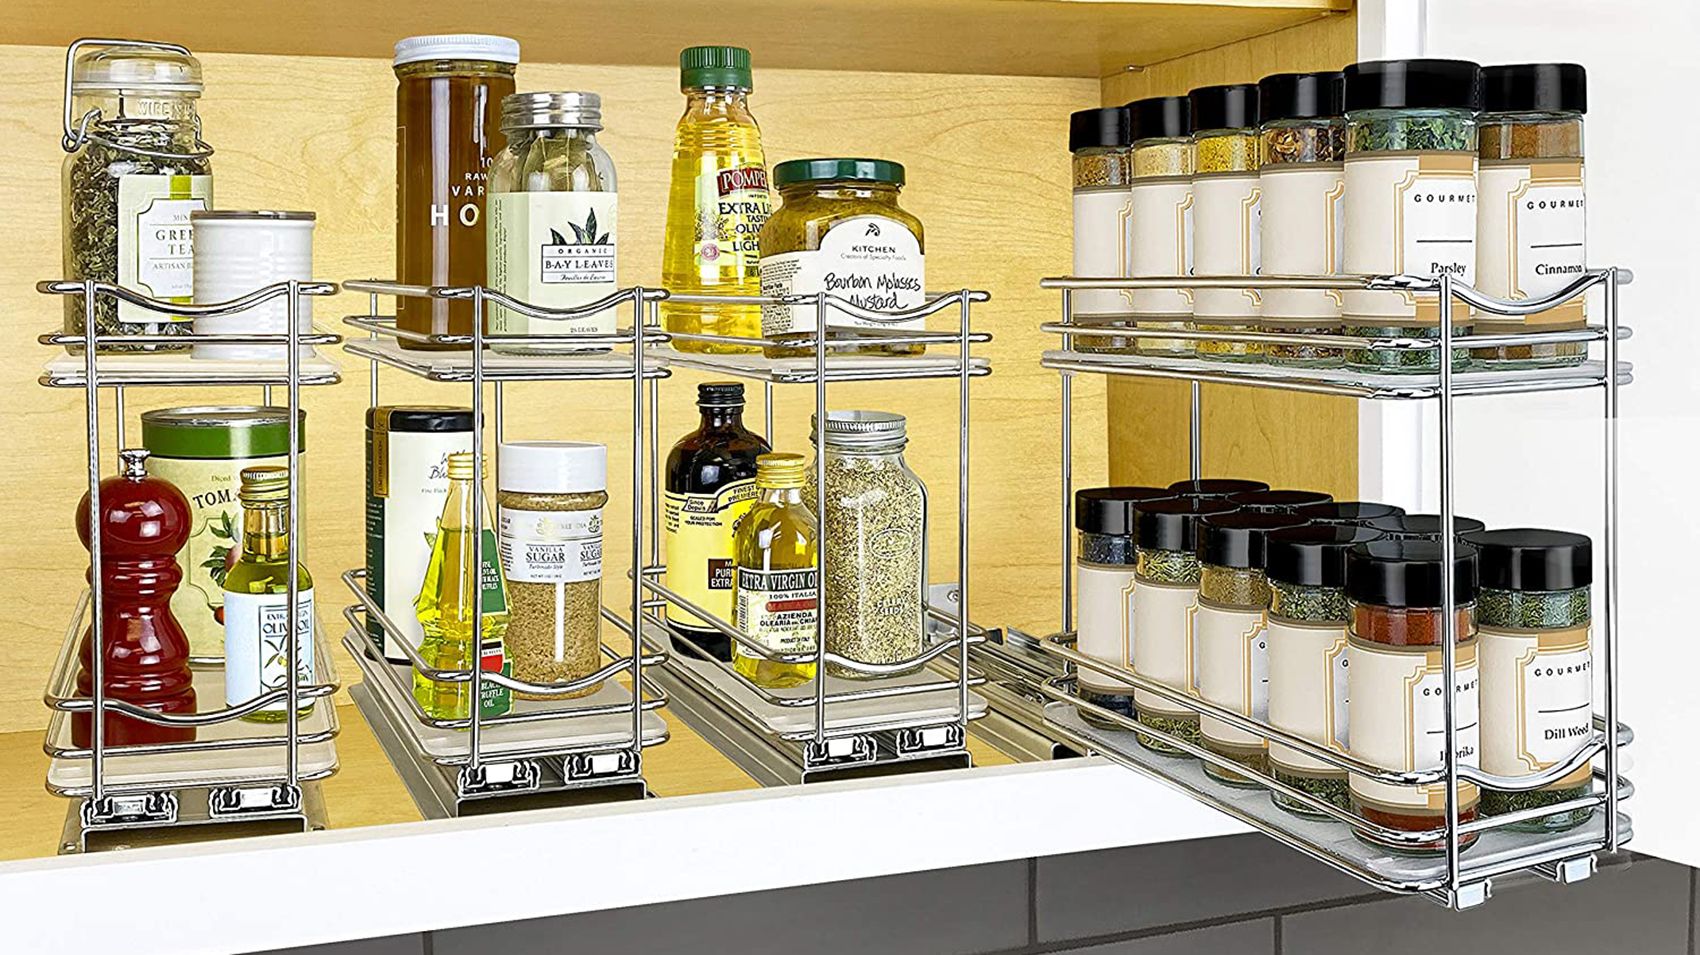 Kitchen Cabinet Organization Hack for Cords – The Cord Wrapper